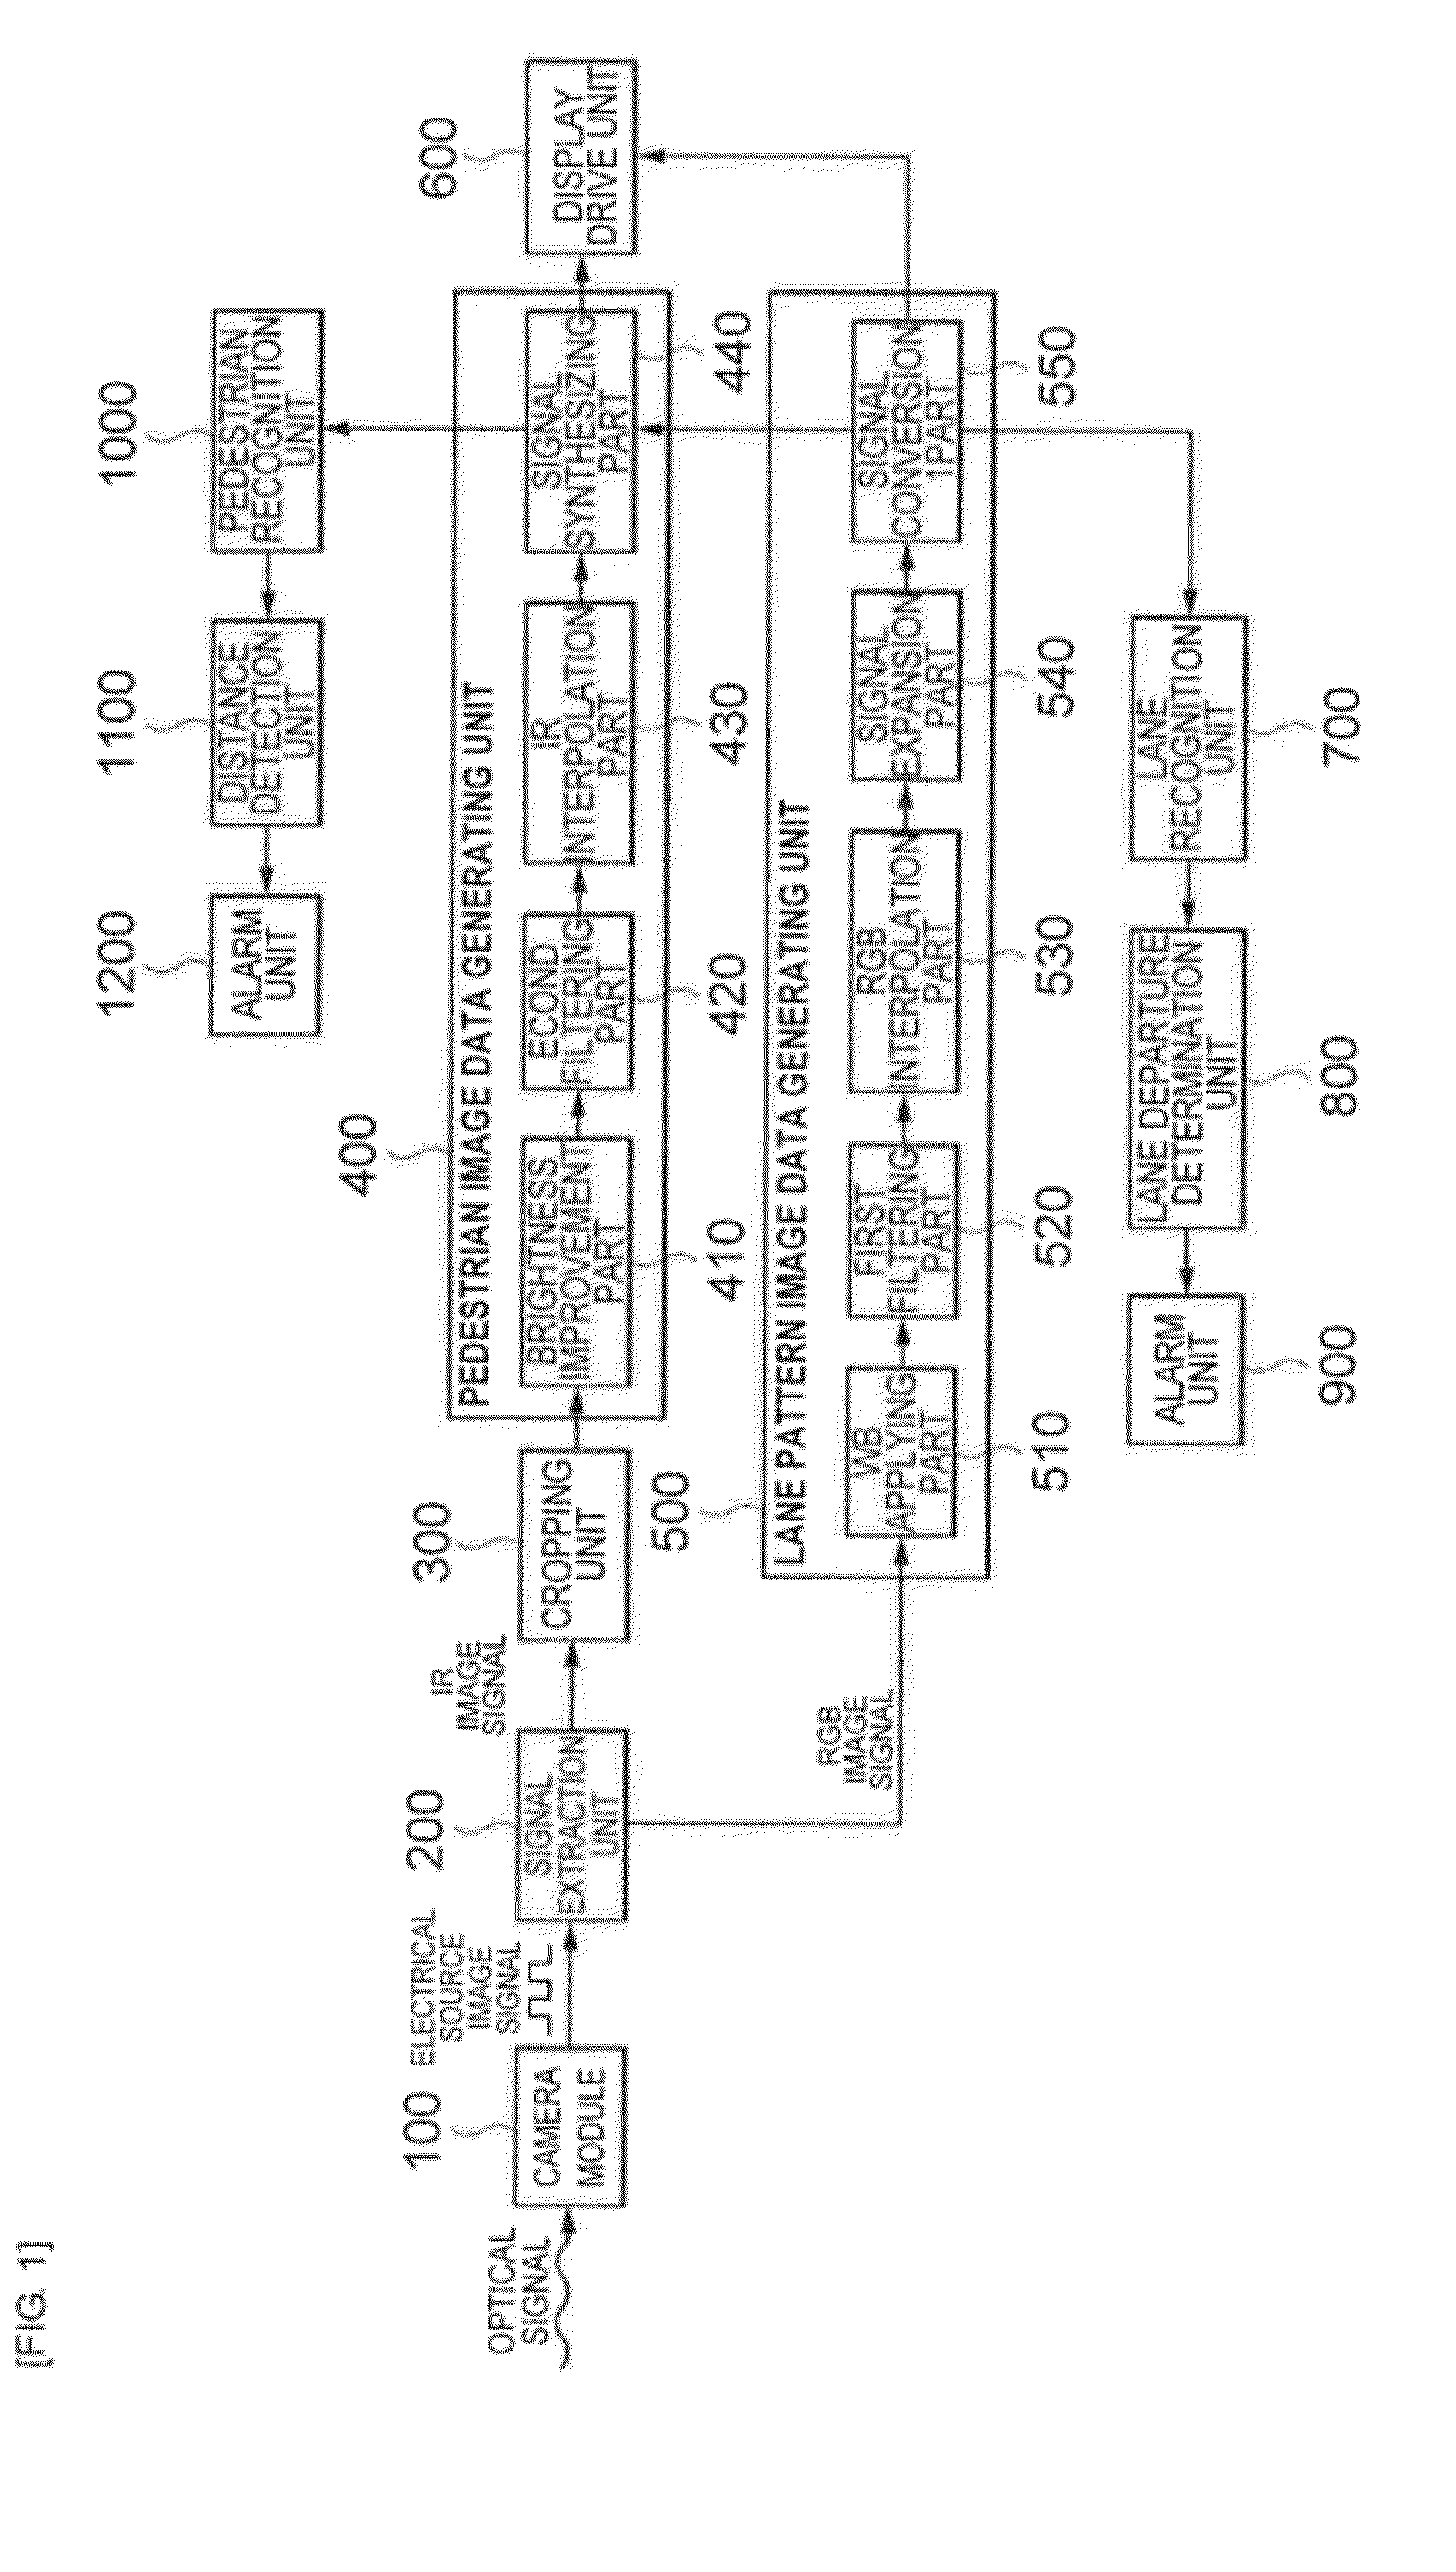 System and method of assisting visibility of driver